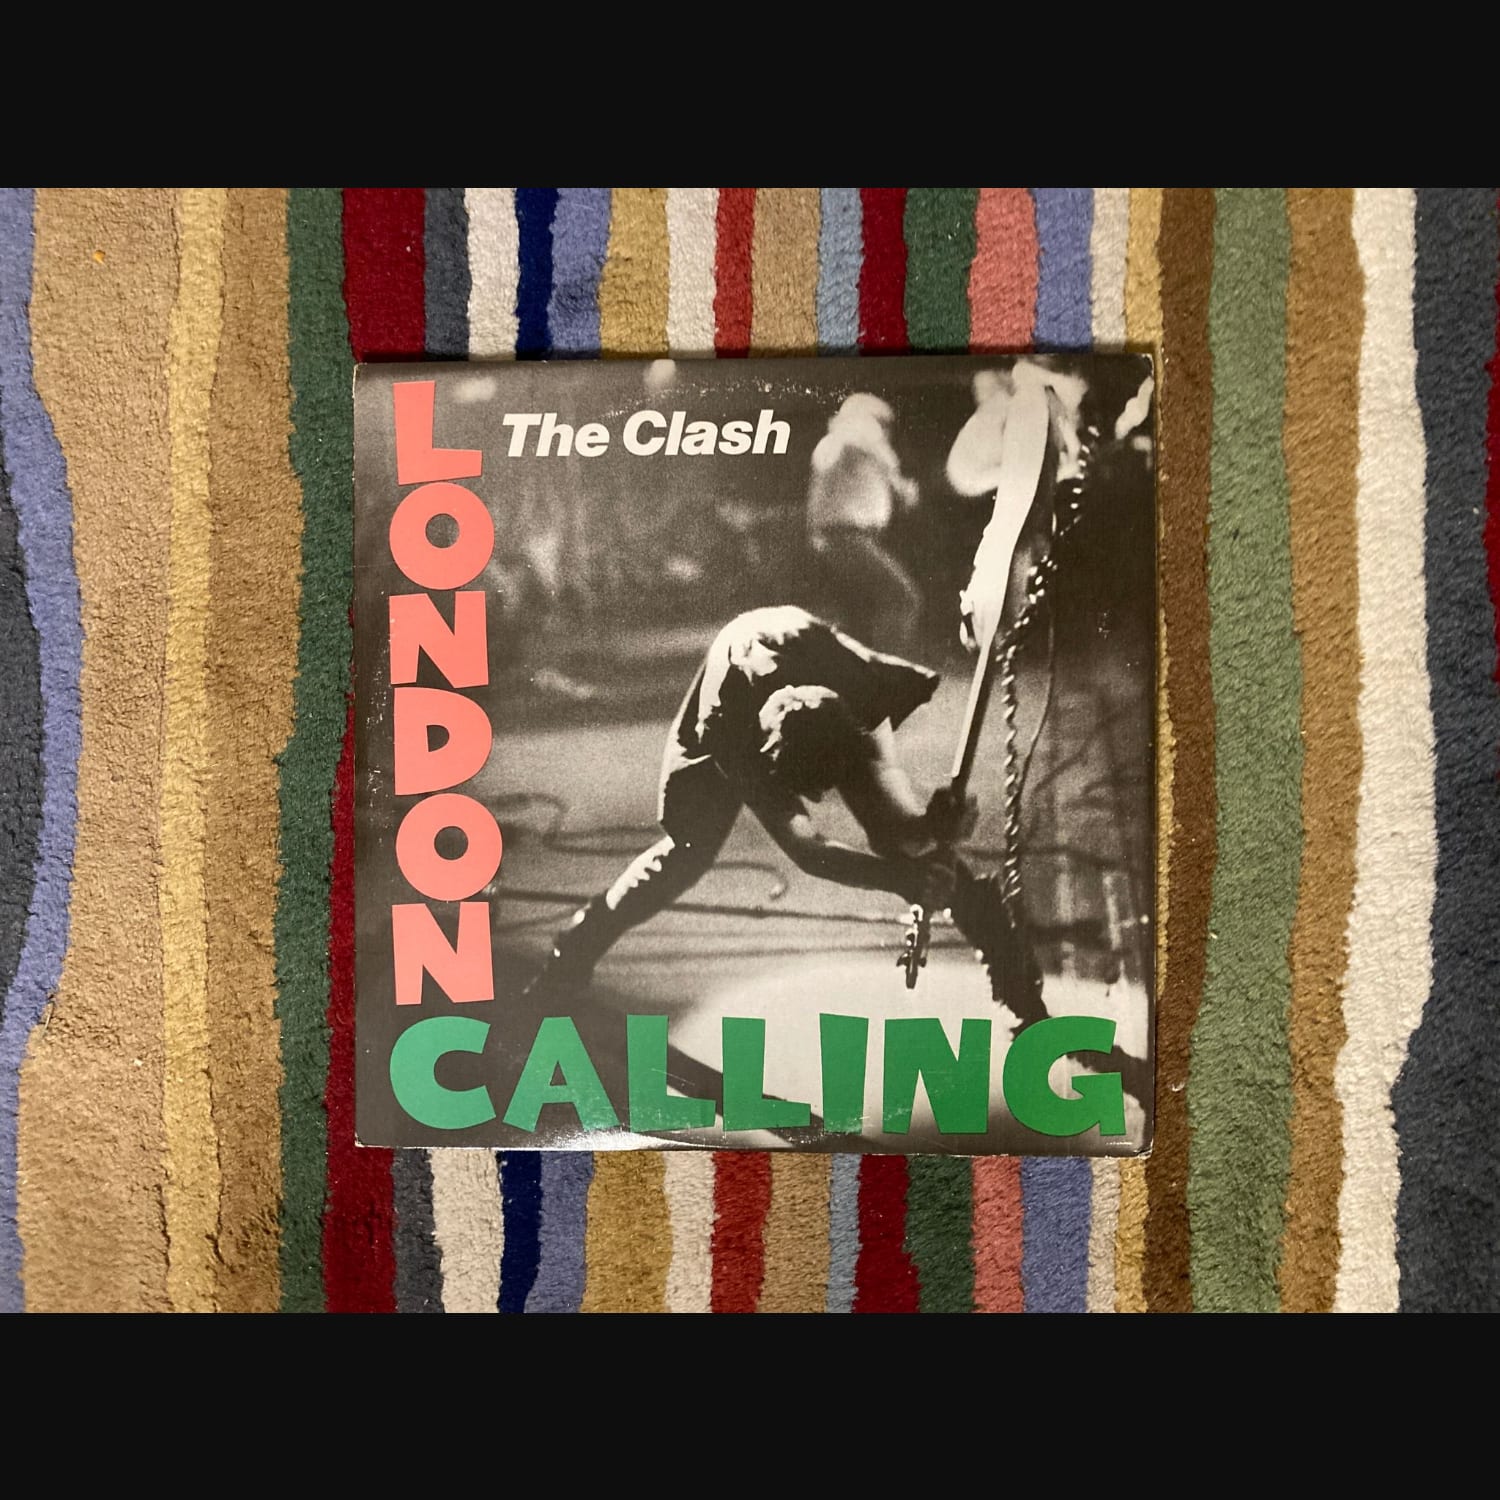 Got an original 1980 US pressing of The Clash's London Calling for free yesterday. One of my top wants.